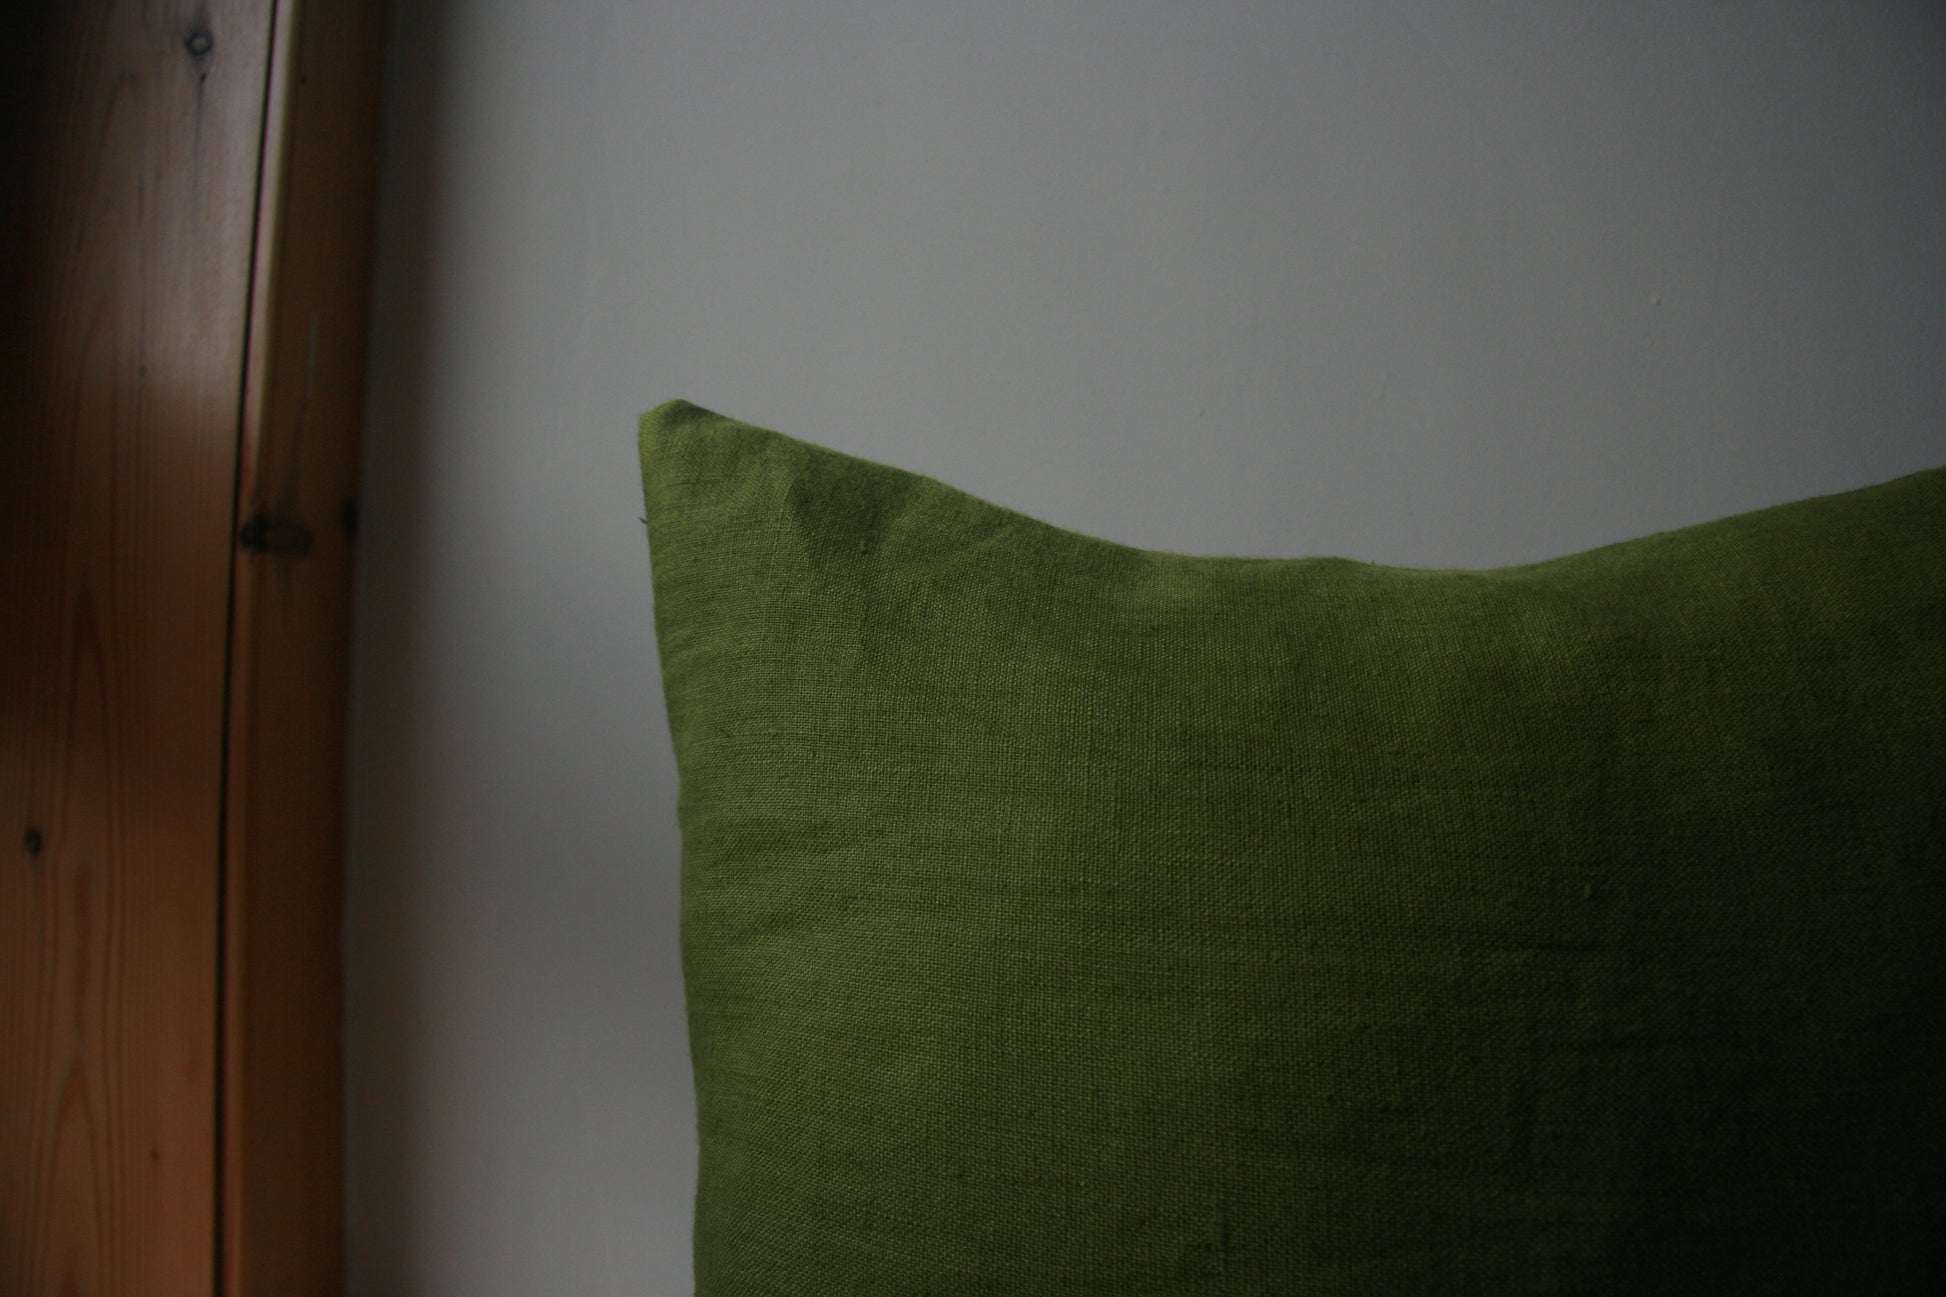 Close up image of corner of cushion. Green fabric visible against background of cream and wood